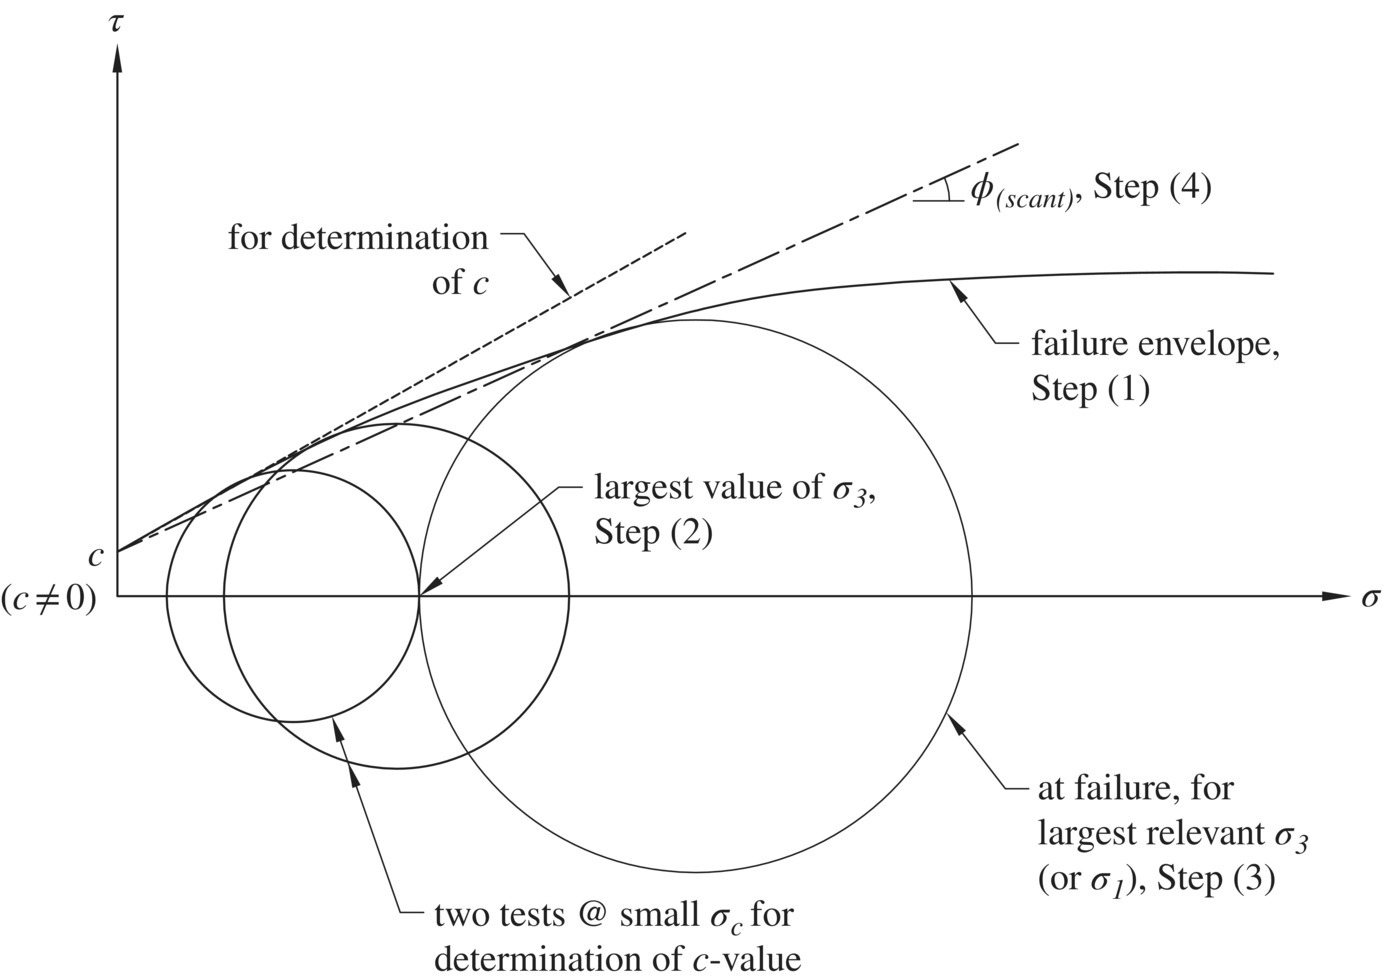 Graph of τ vs. σ with 3 overlapping circles along the x-axis labeled Two tests @ small σc for determination of c-value, Largest value of σ3 (step 2), At failure, for largest relevant σ3 (step 3), etc.